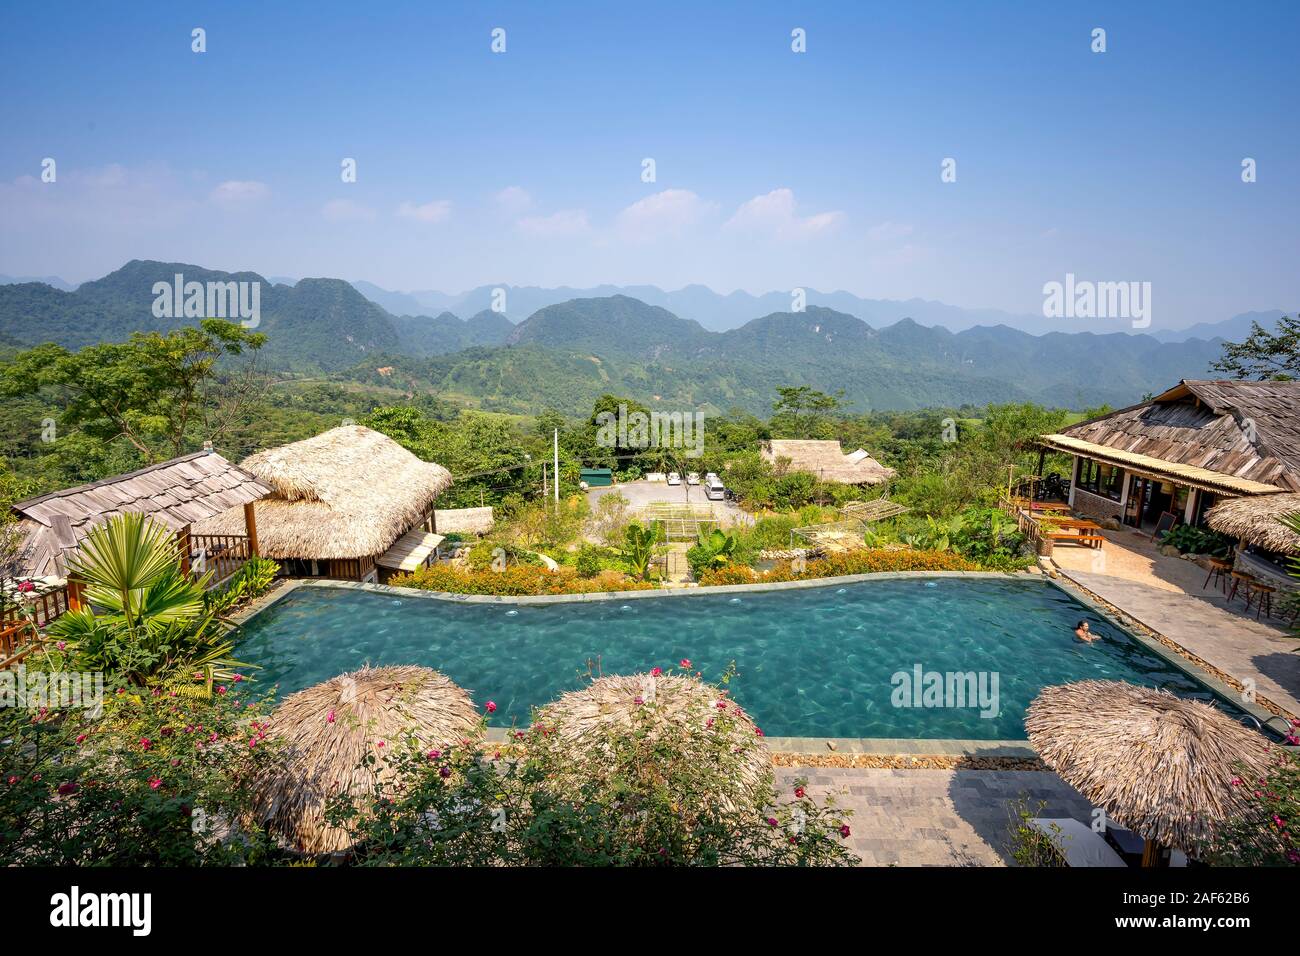 Pu Luong Commune, Thanh Hoa Province, Vietnam - October 1, 2019: Panoramic image of Pu Luong Ecological Park Resort with beautiful mountains in Thanh Stock Photo